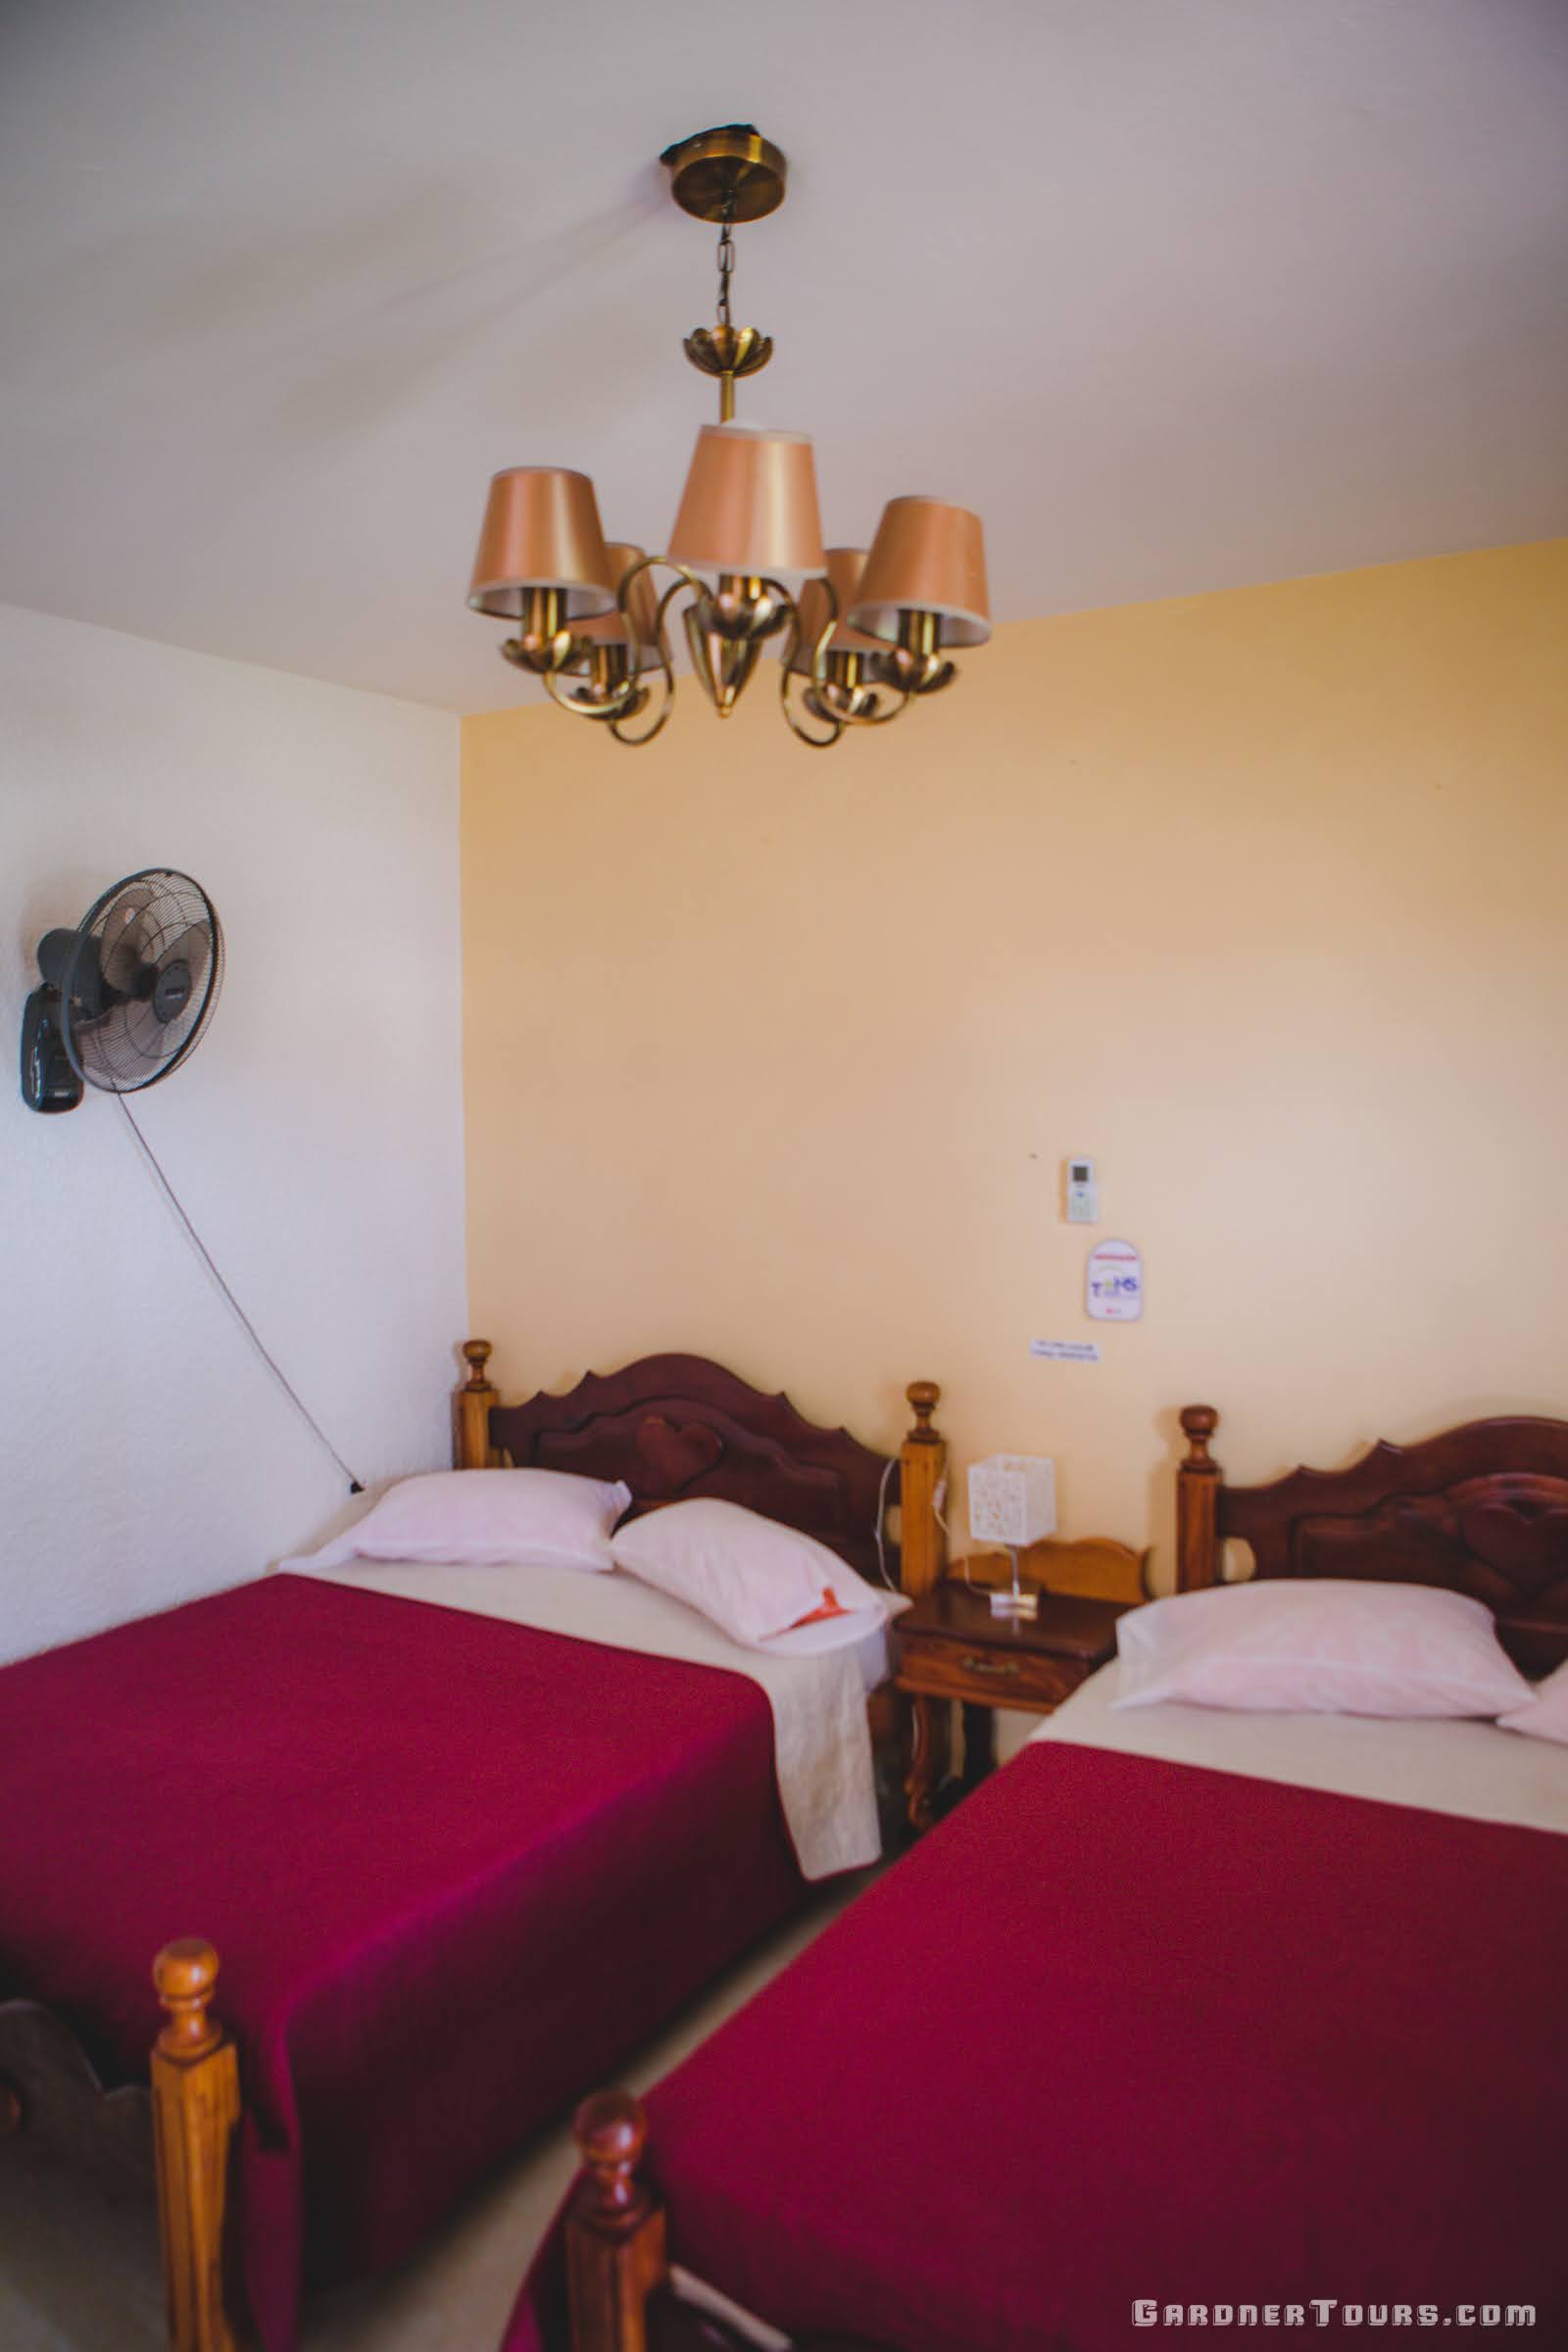 Bedroom view with two regular size beds of a 3-Star Casa Particular BnB in Viñales, Cuba